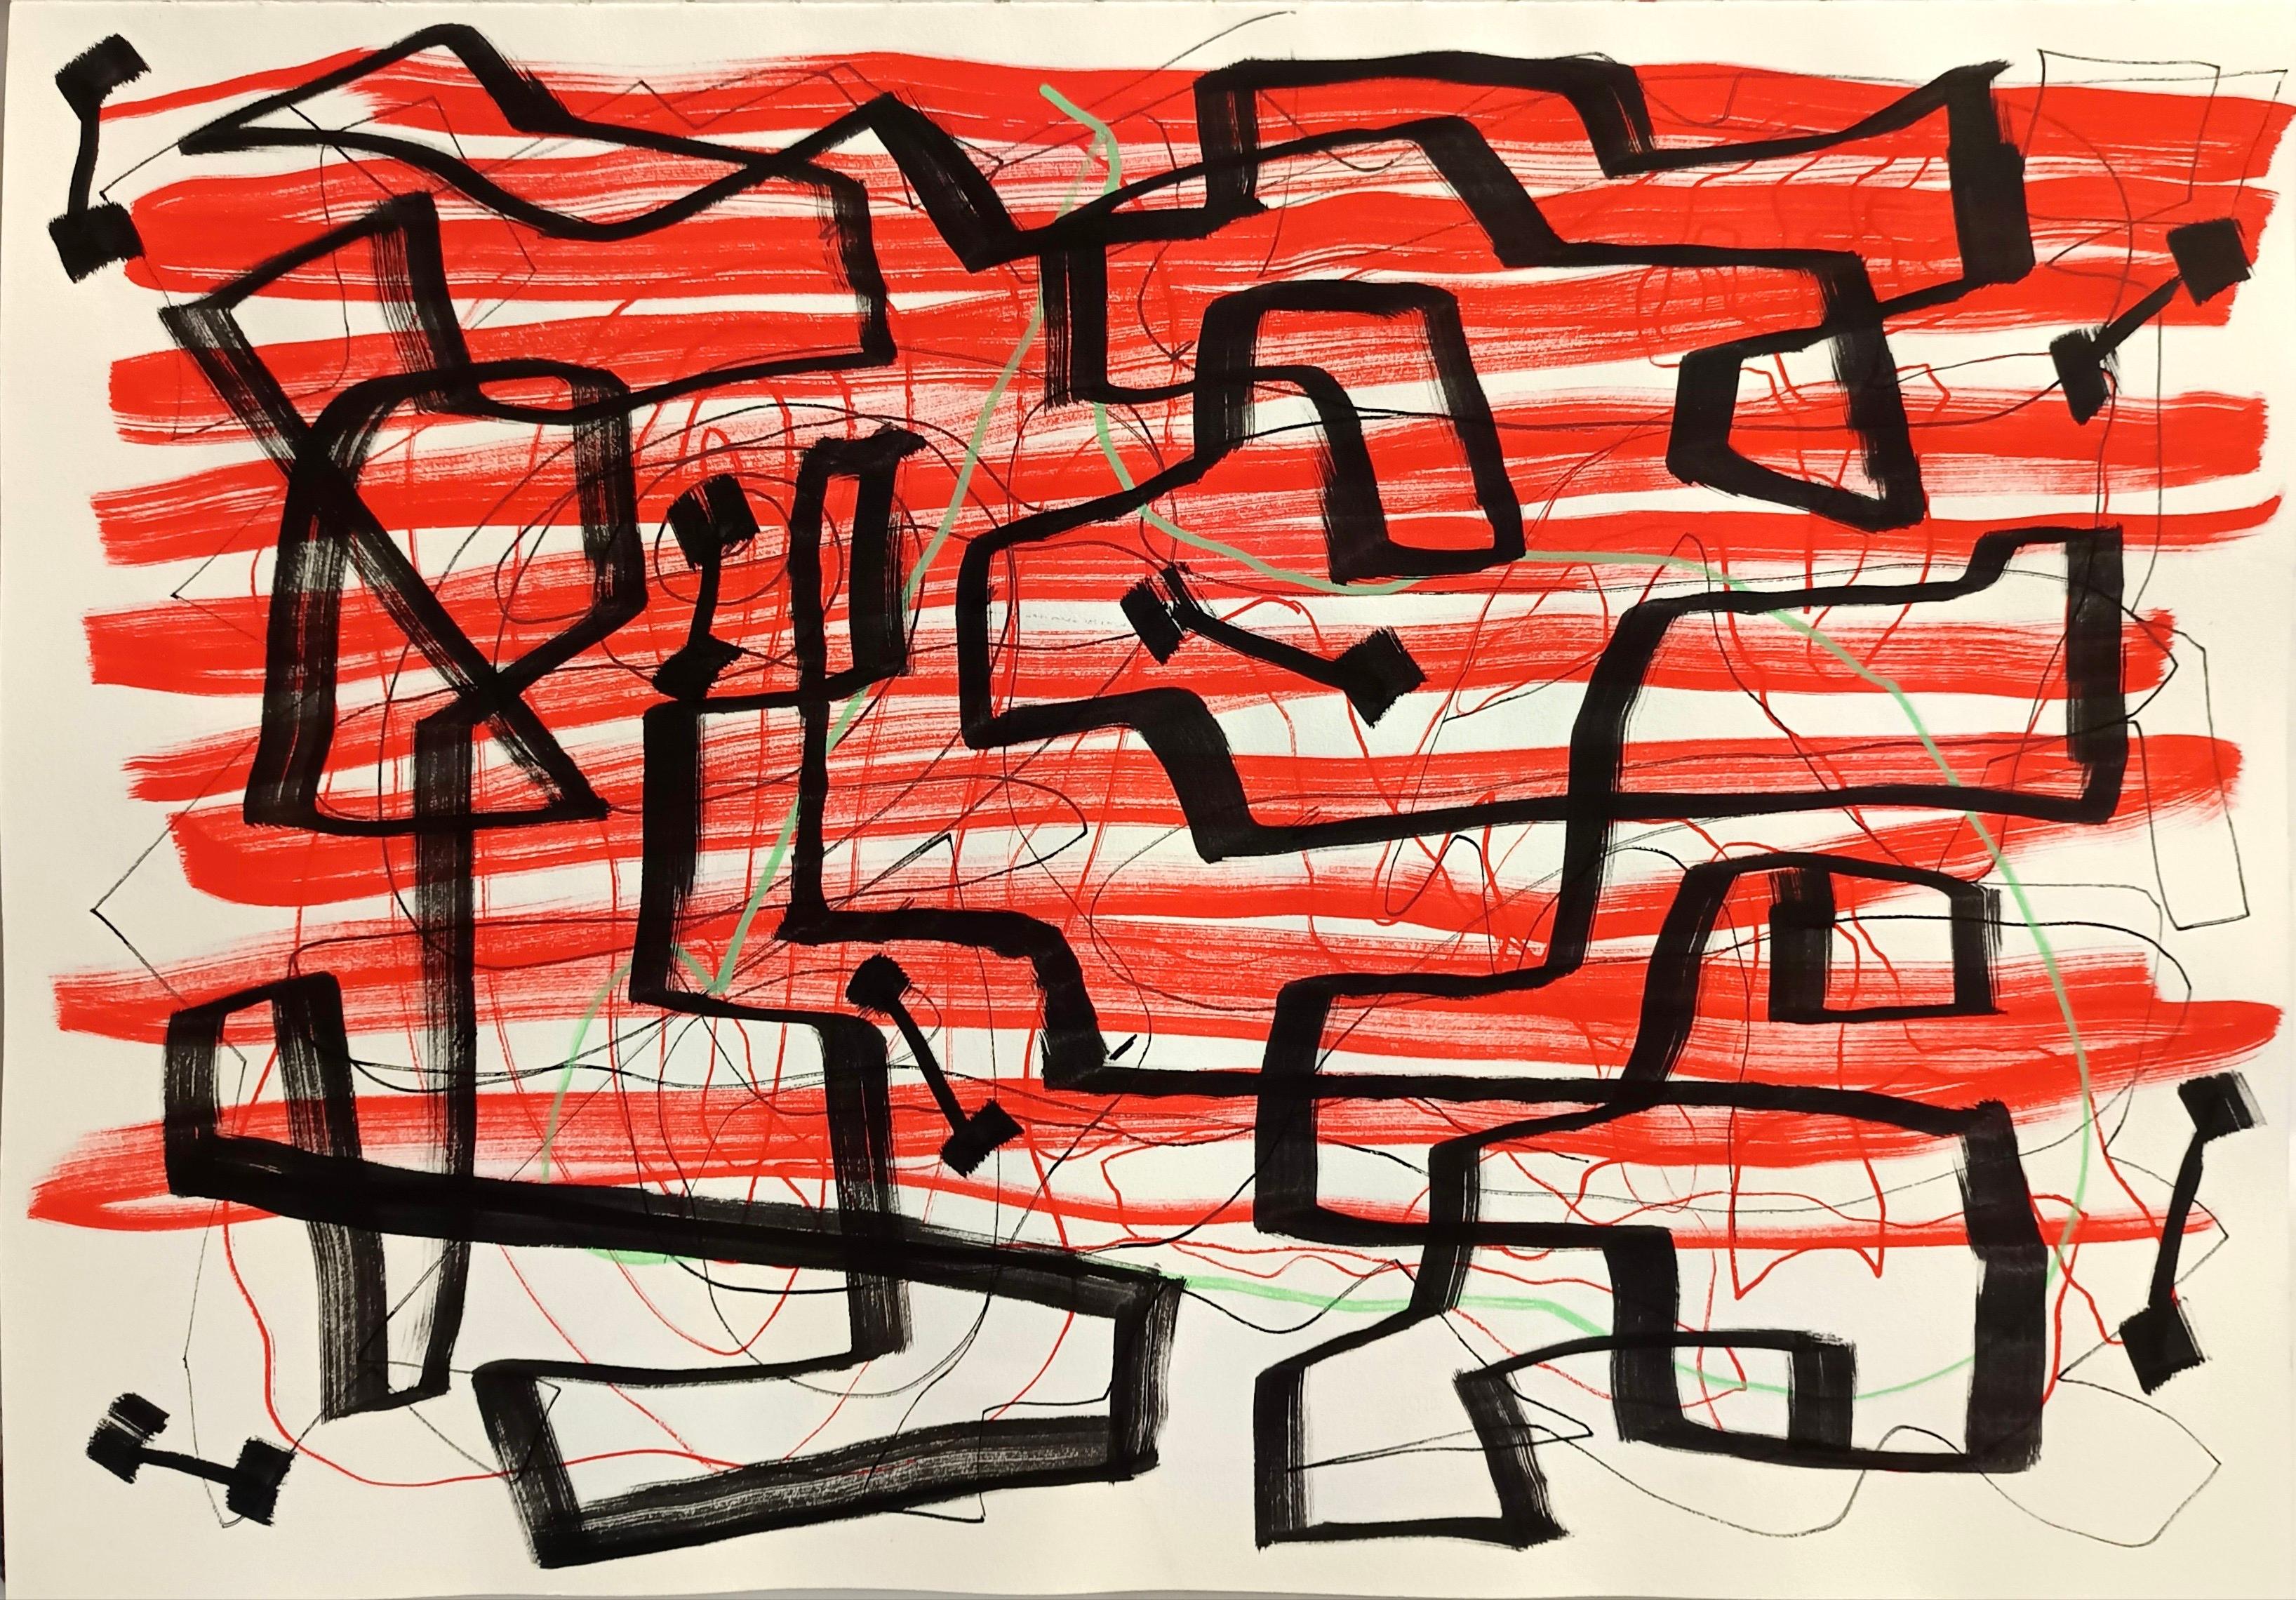 Enzio Wenk Abstract Painting - "Composizione" by E. Wenk, 2020-21-Black and Red Acrylic Paint, NeoExpressionism